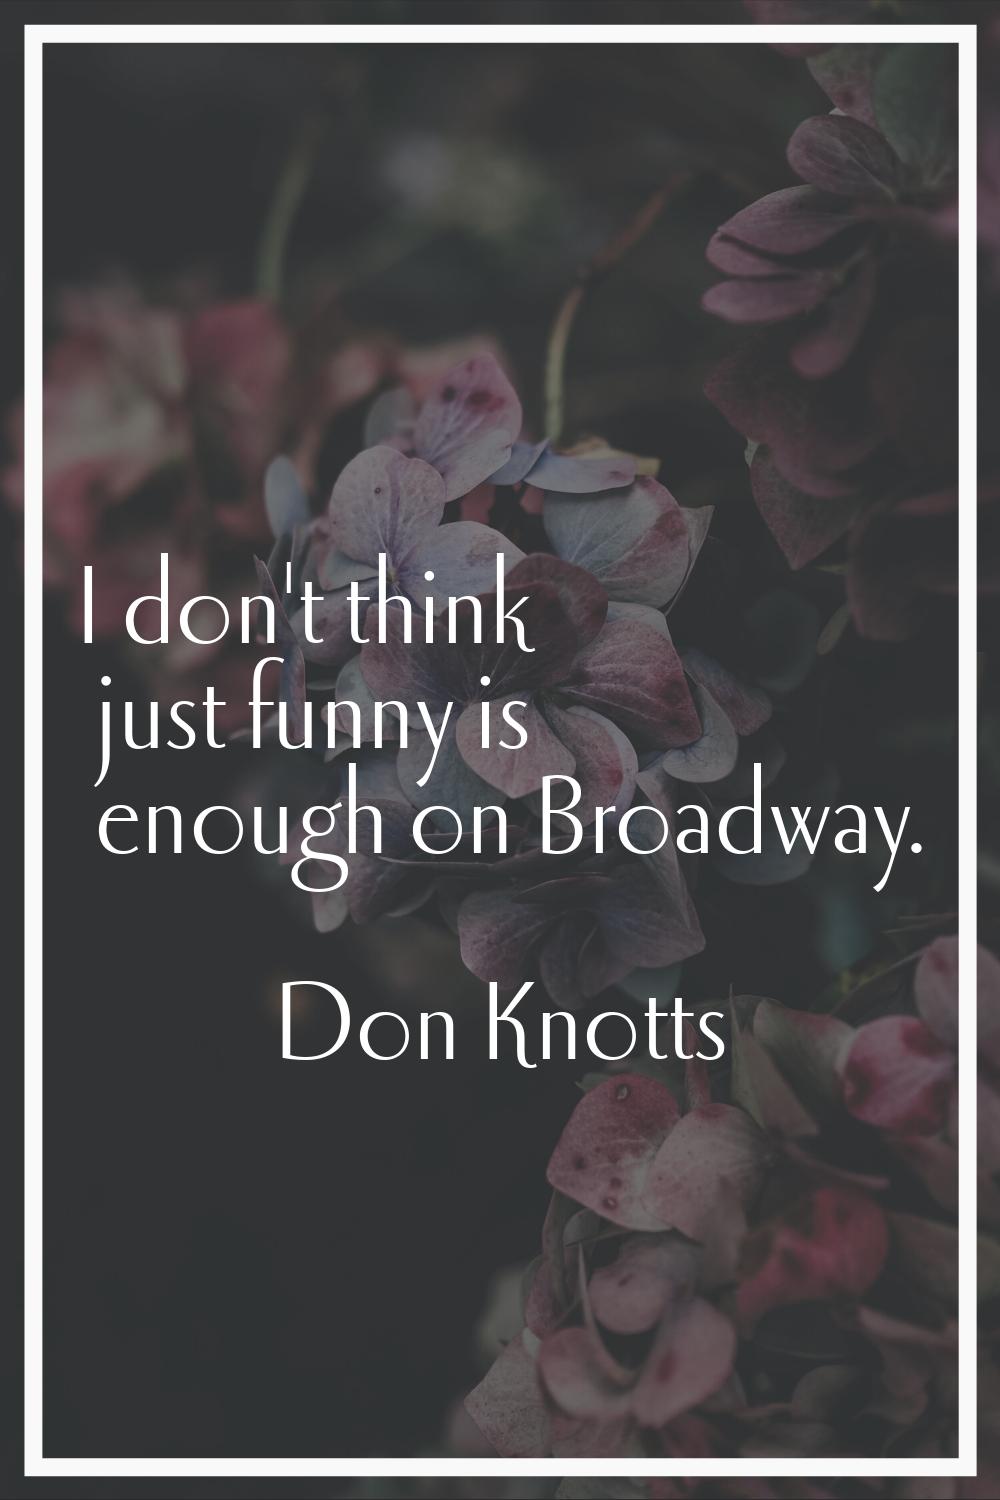 I don't think just funny is enough on Broadway.